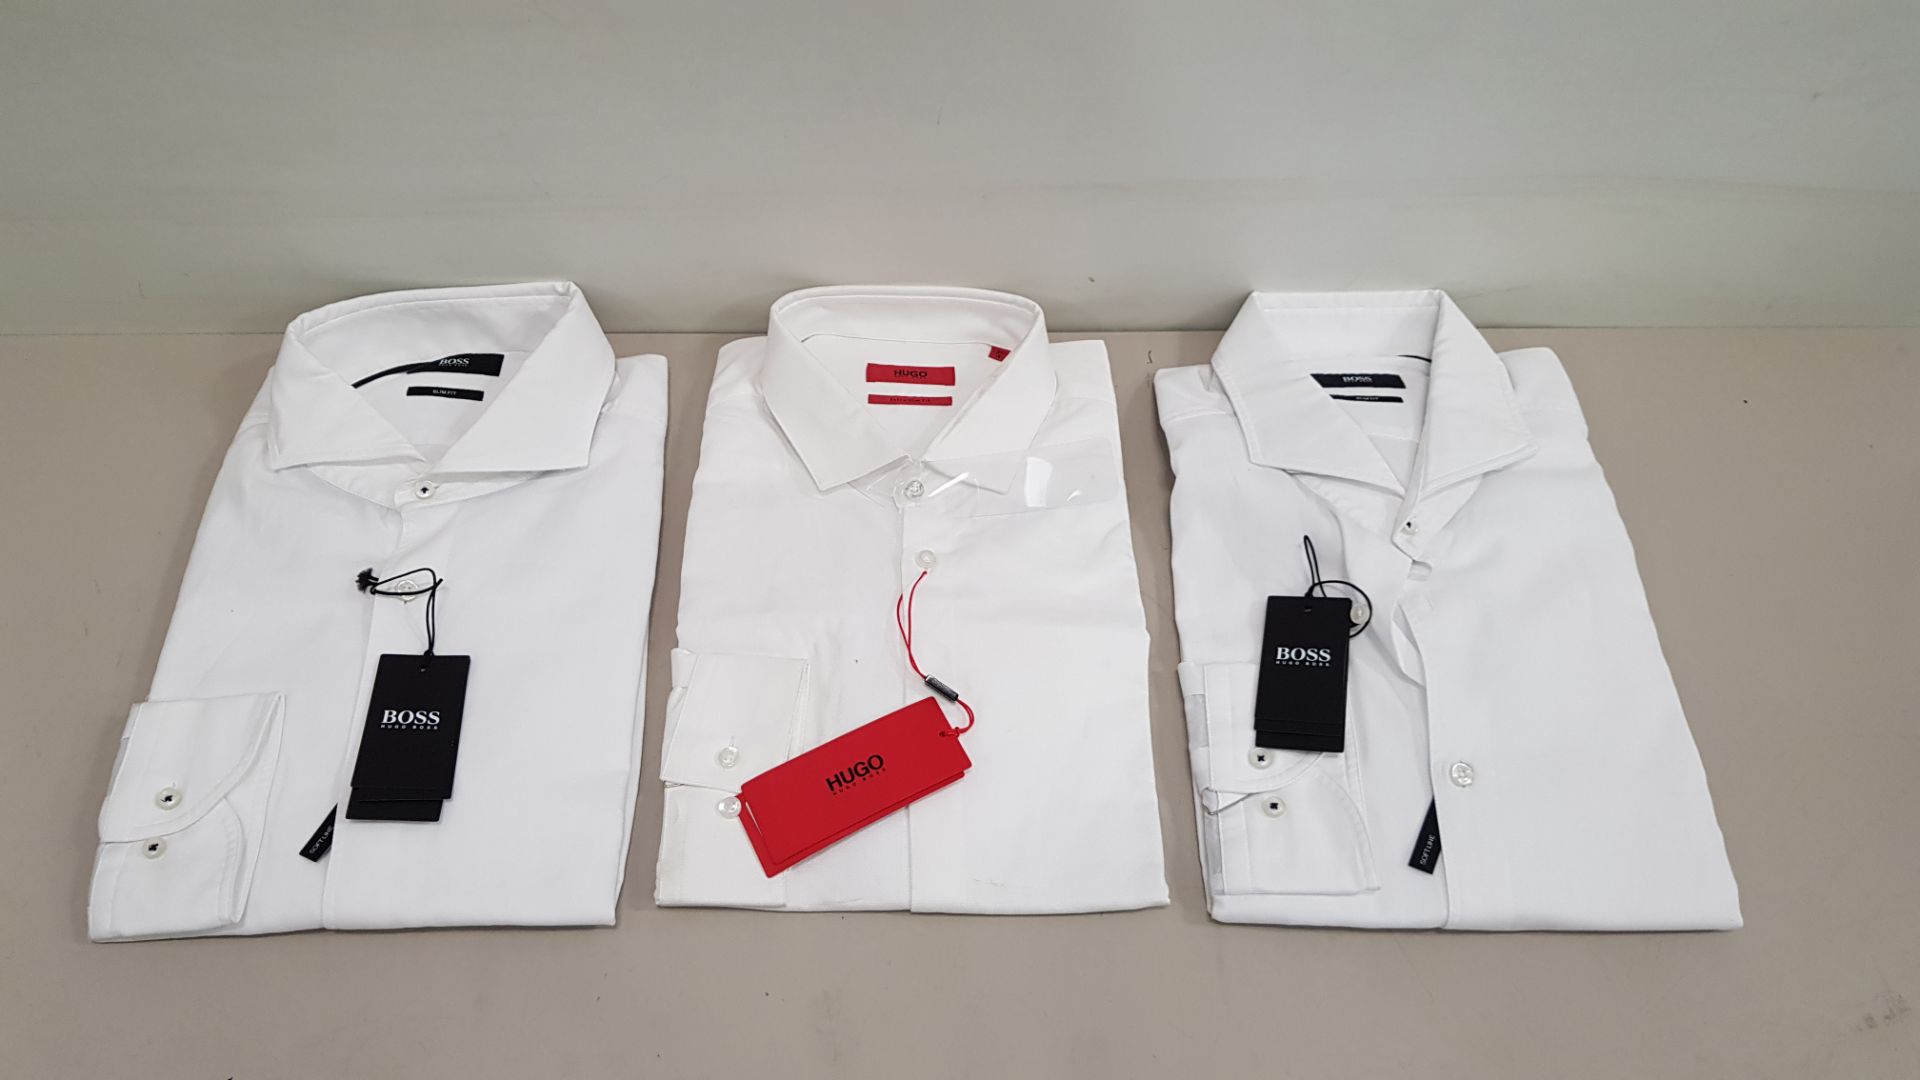 5 X BRAND NEW HUGO BOSS SHIRTS IN VARIOUS SIZES IE REGULAR FIT, SLIM FIT AND EXTRA SLIM FIT RRP £